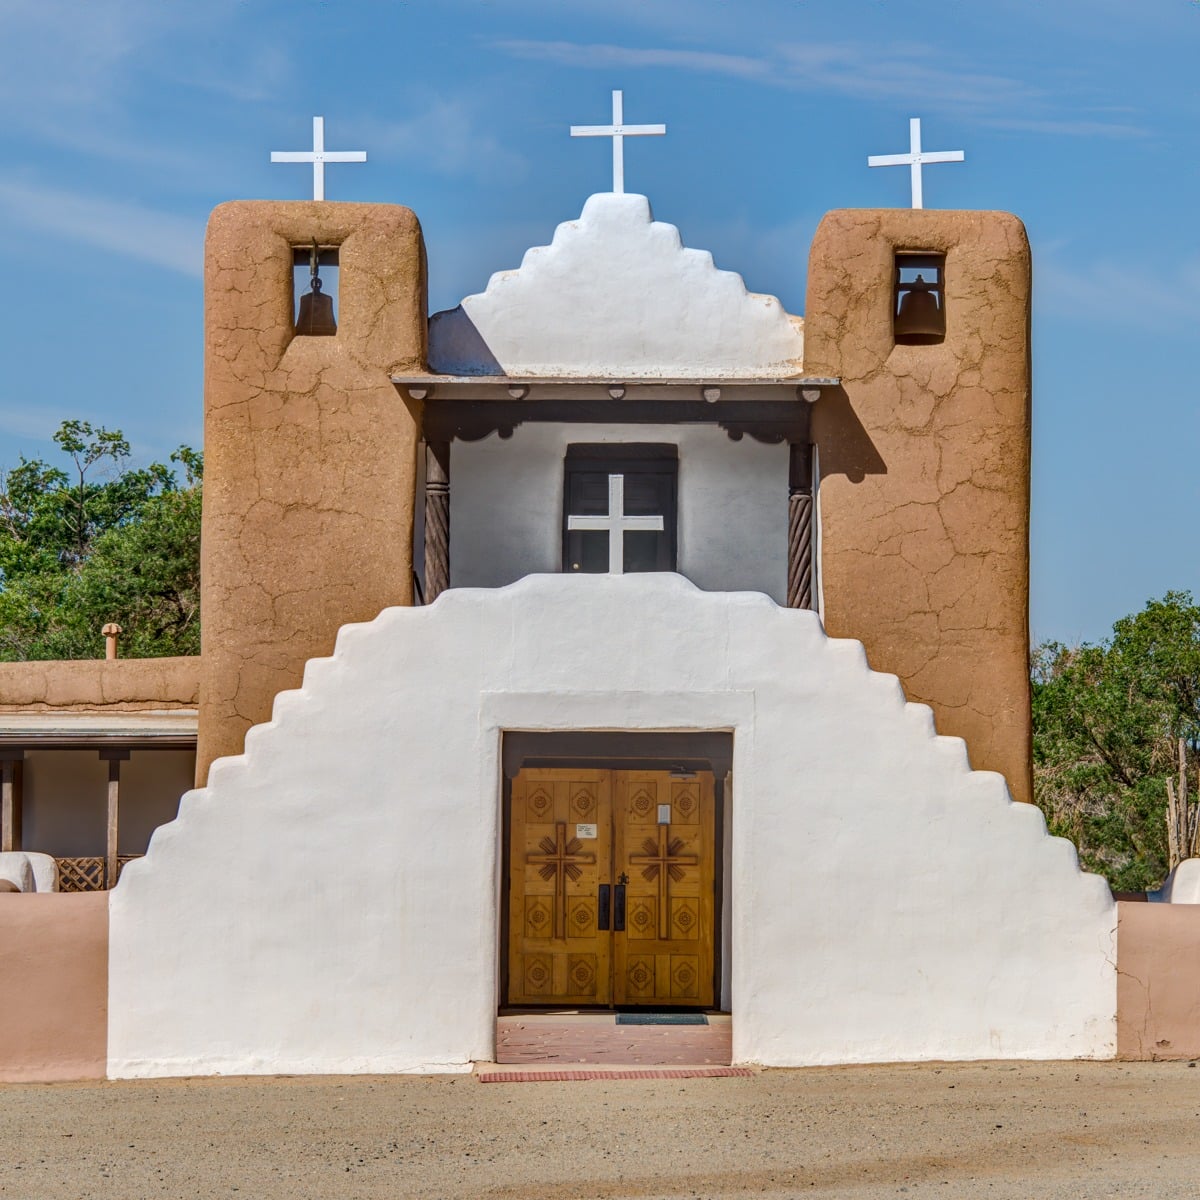 A frontal view of St. Jerome (San Geronimo) Catholic Chapel with the whitewashed arched gateway in front. The chapel is located in the heart of Taos Pueblo, New Mexico.